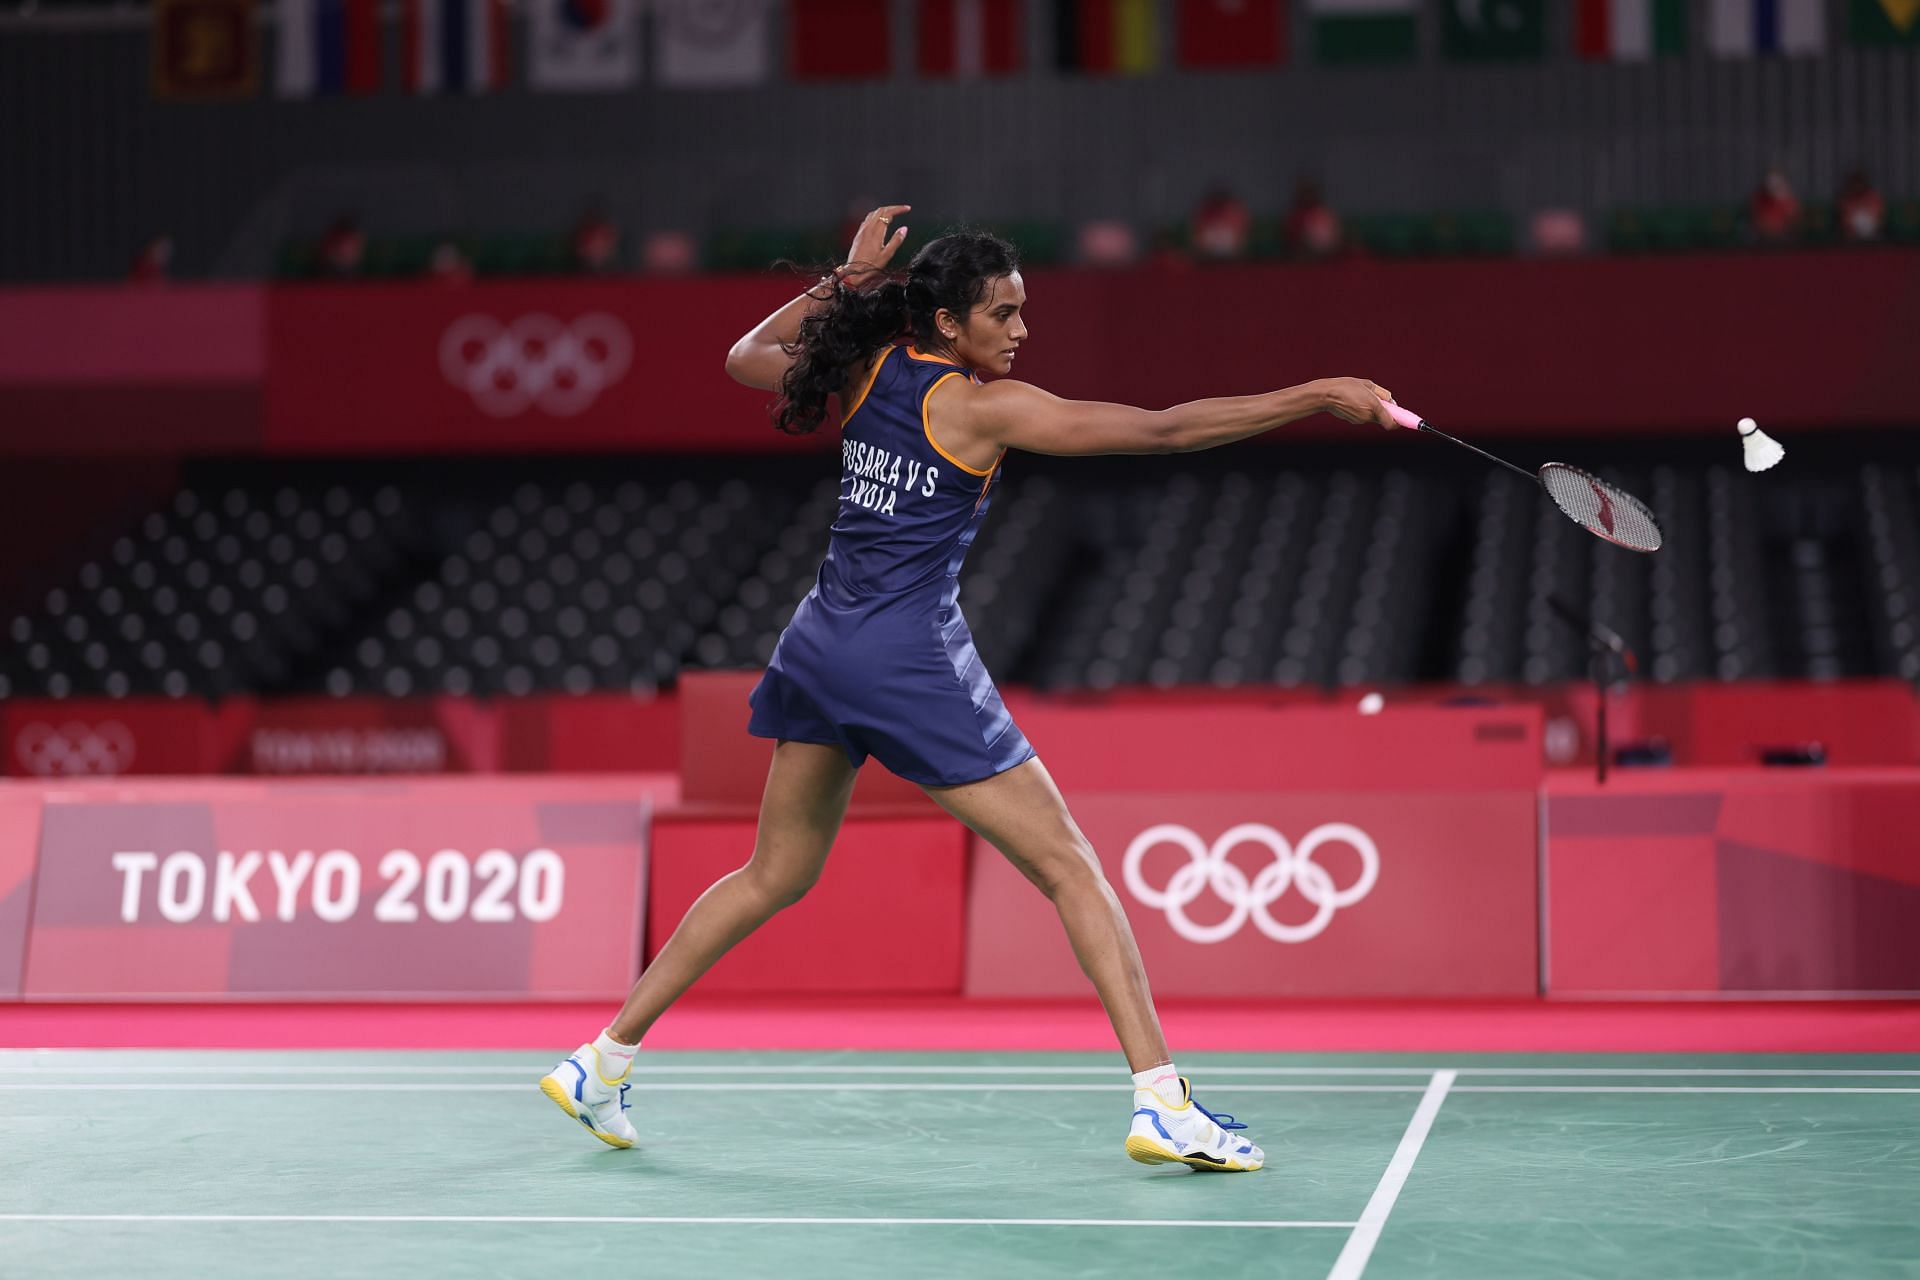 PV Sindhu in action at the 2020 Tokyo Olympics (Image courtesy: Getty Images)